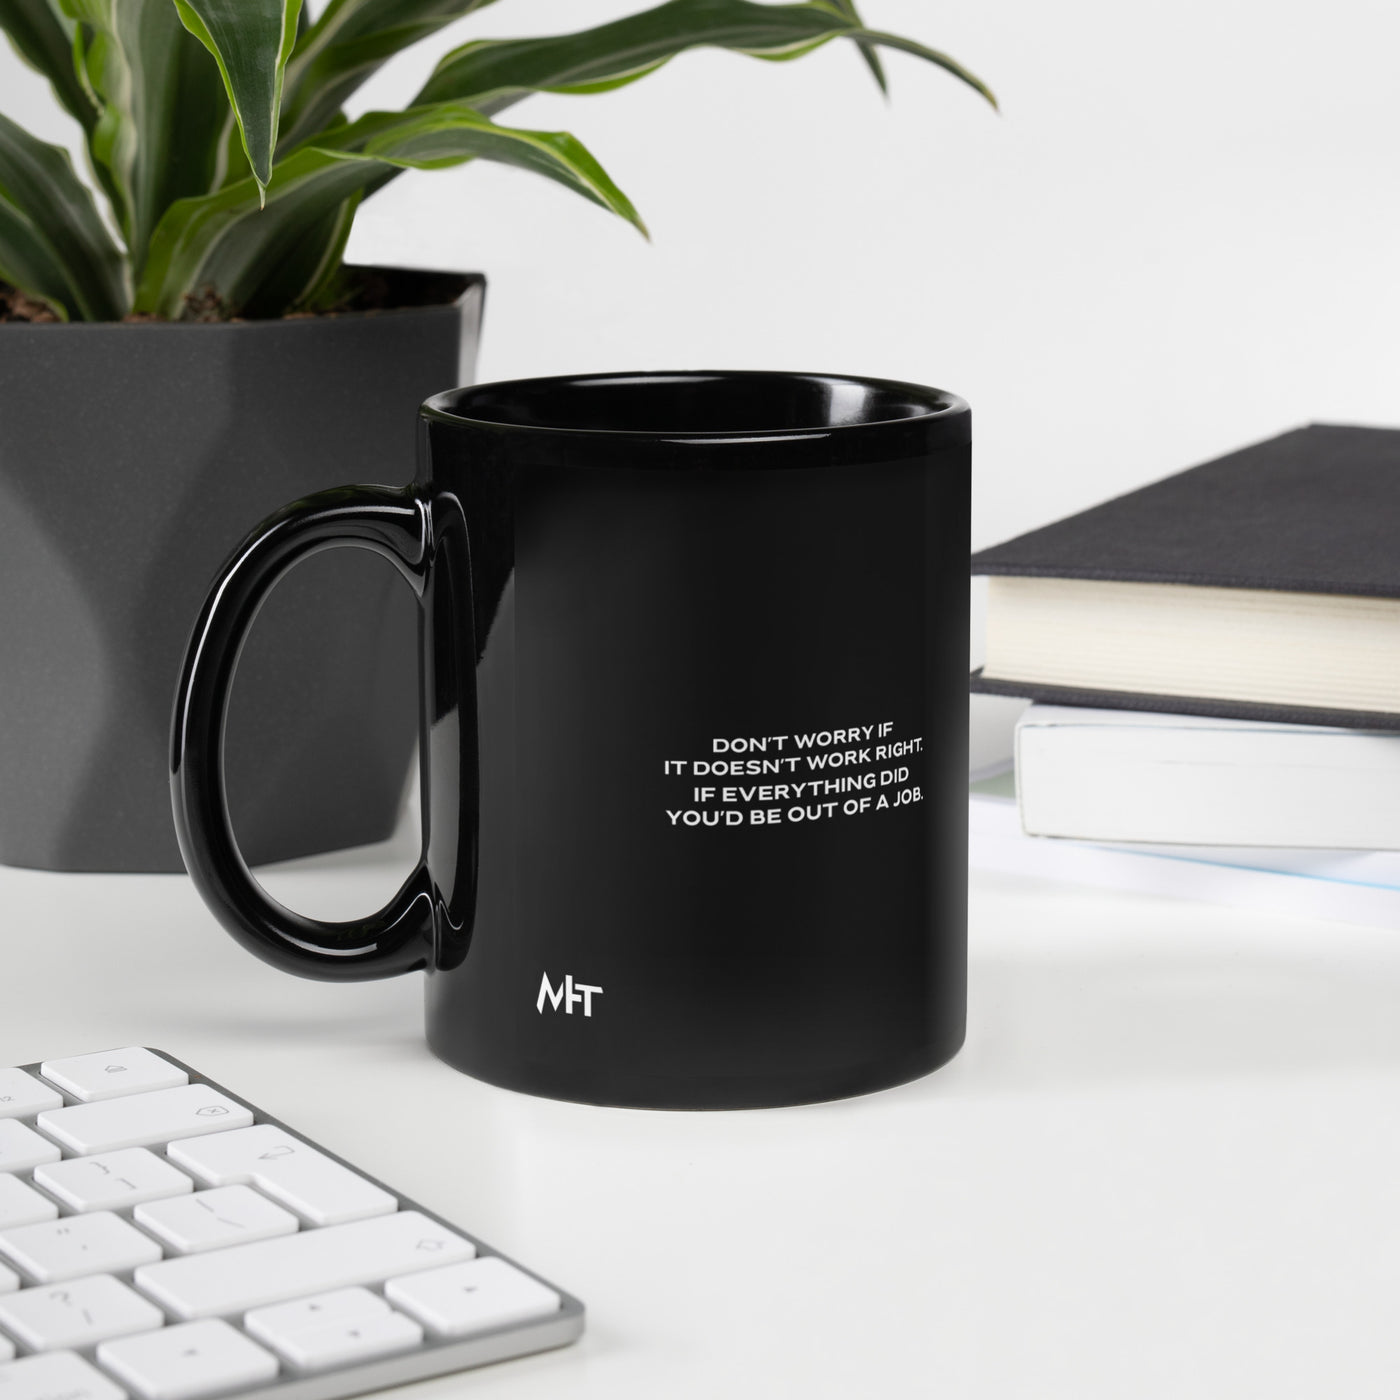 Don't worry if it doesn't work right: if everything did, you would be out of your job - Black Glossy Mug